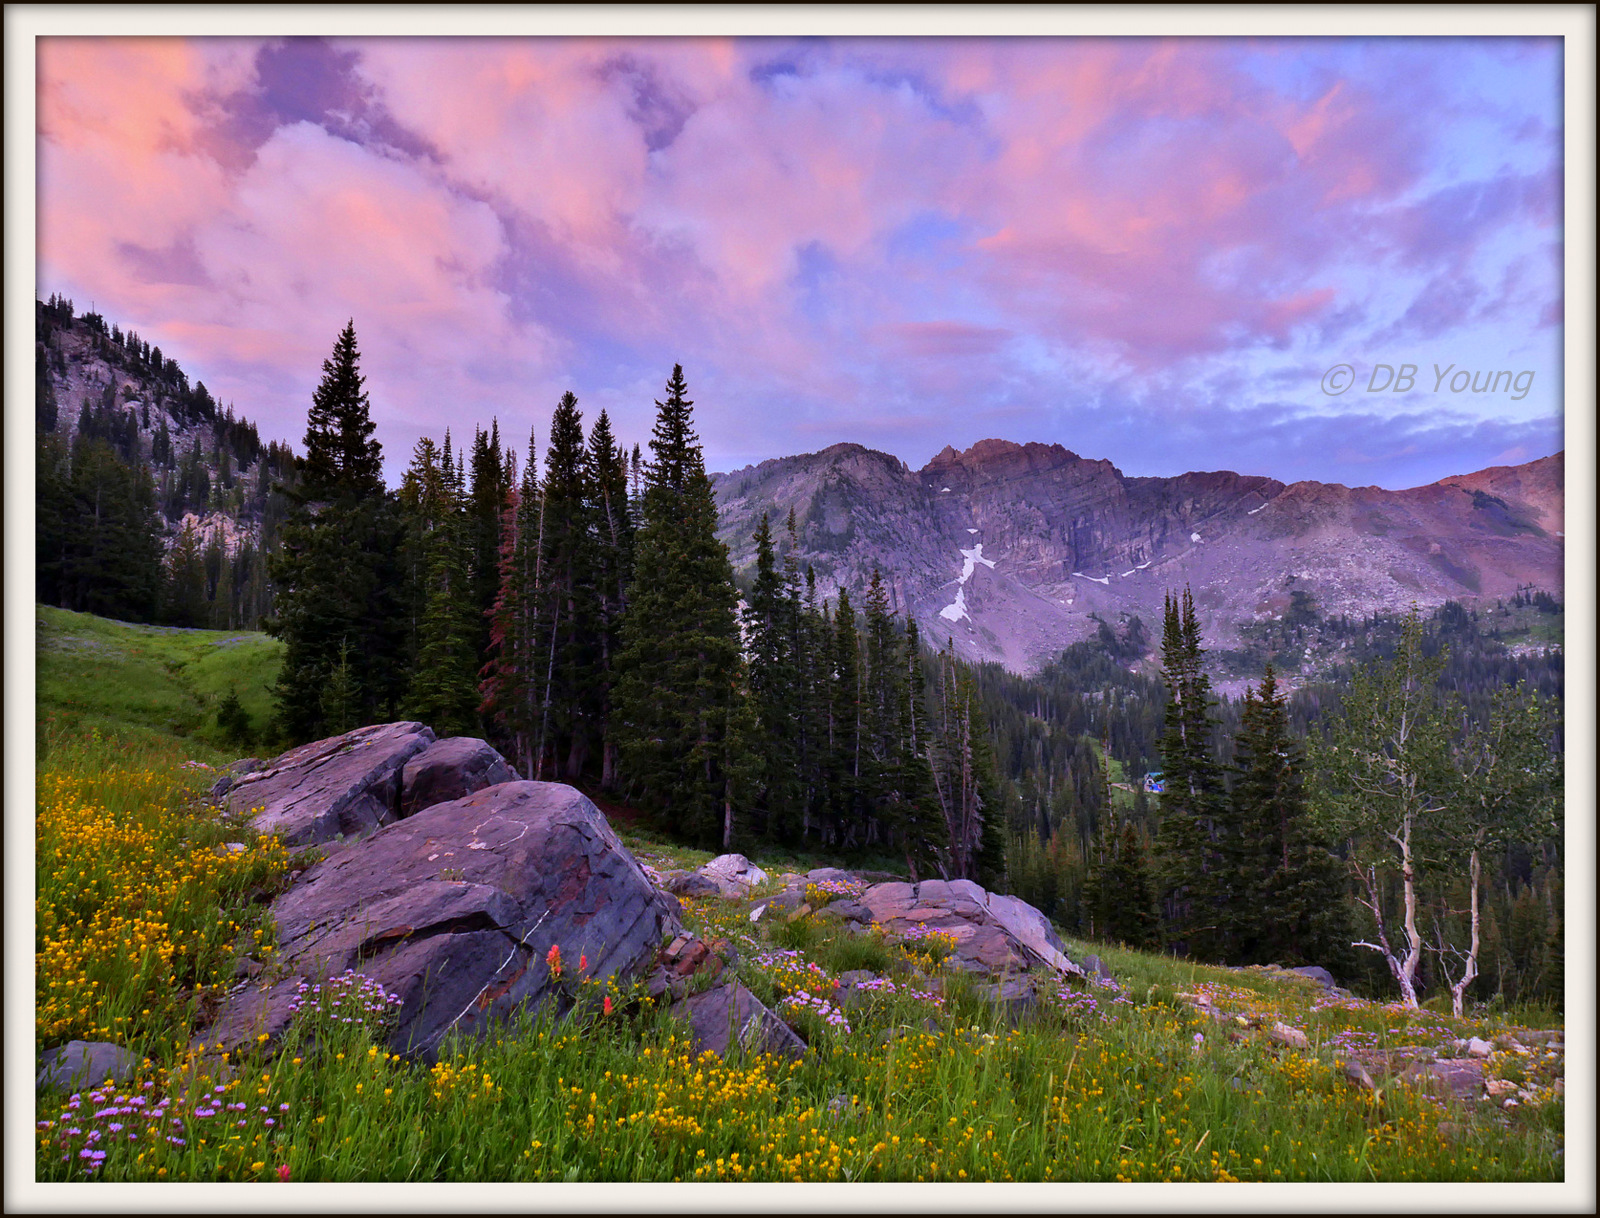 Albion Basin in the Wasatch Range